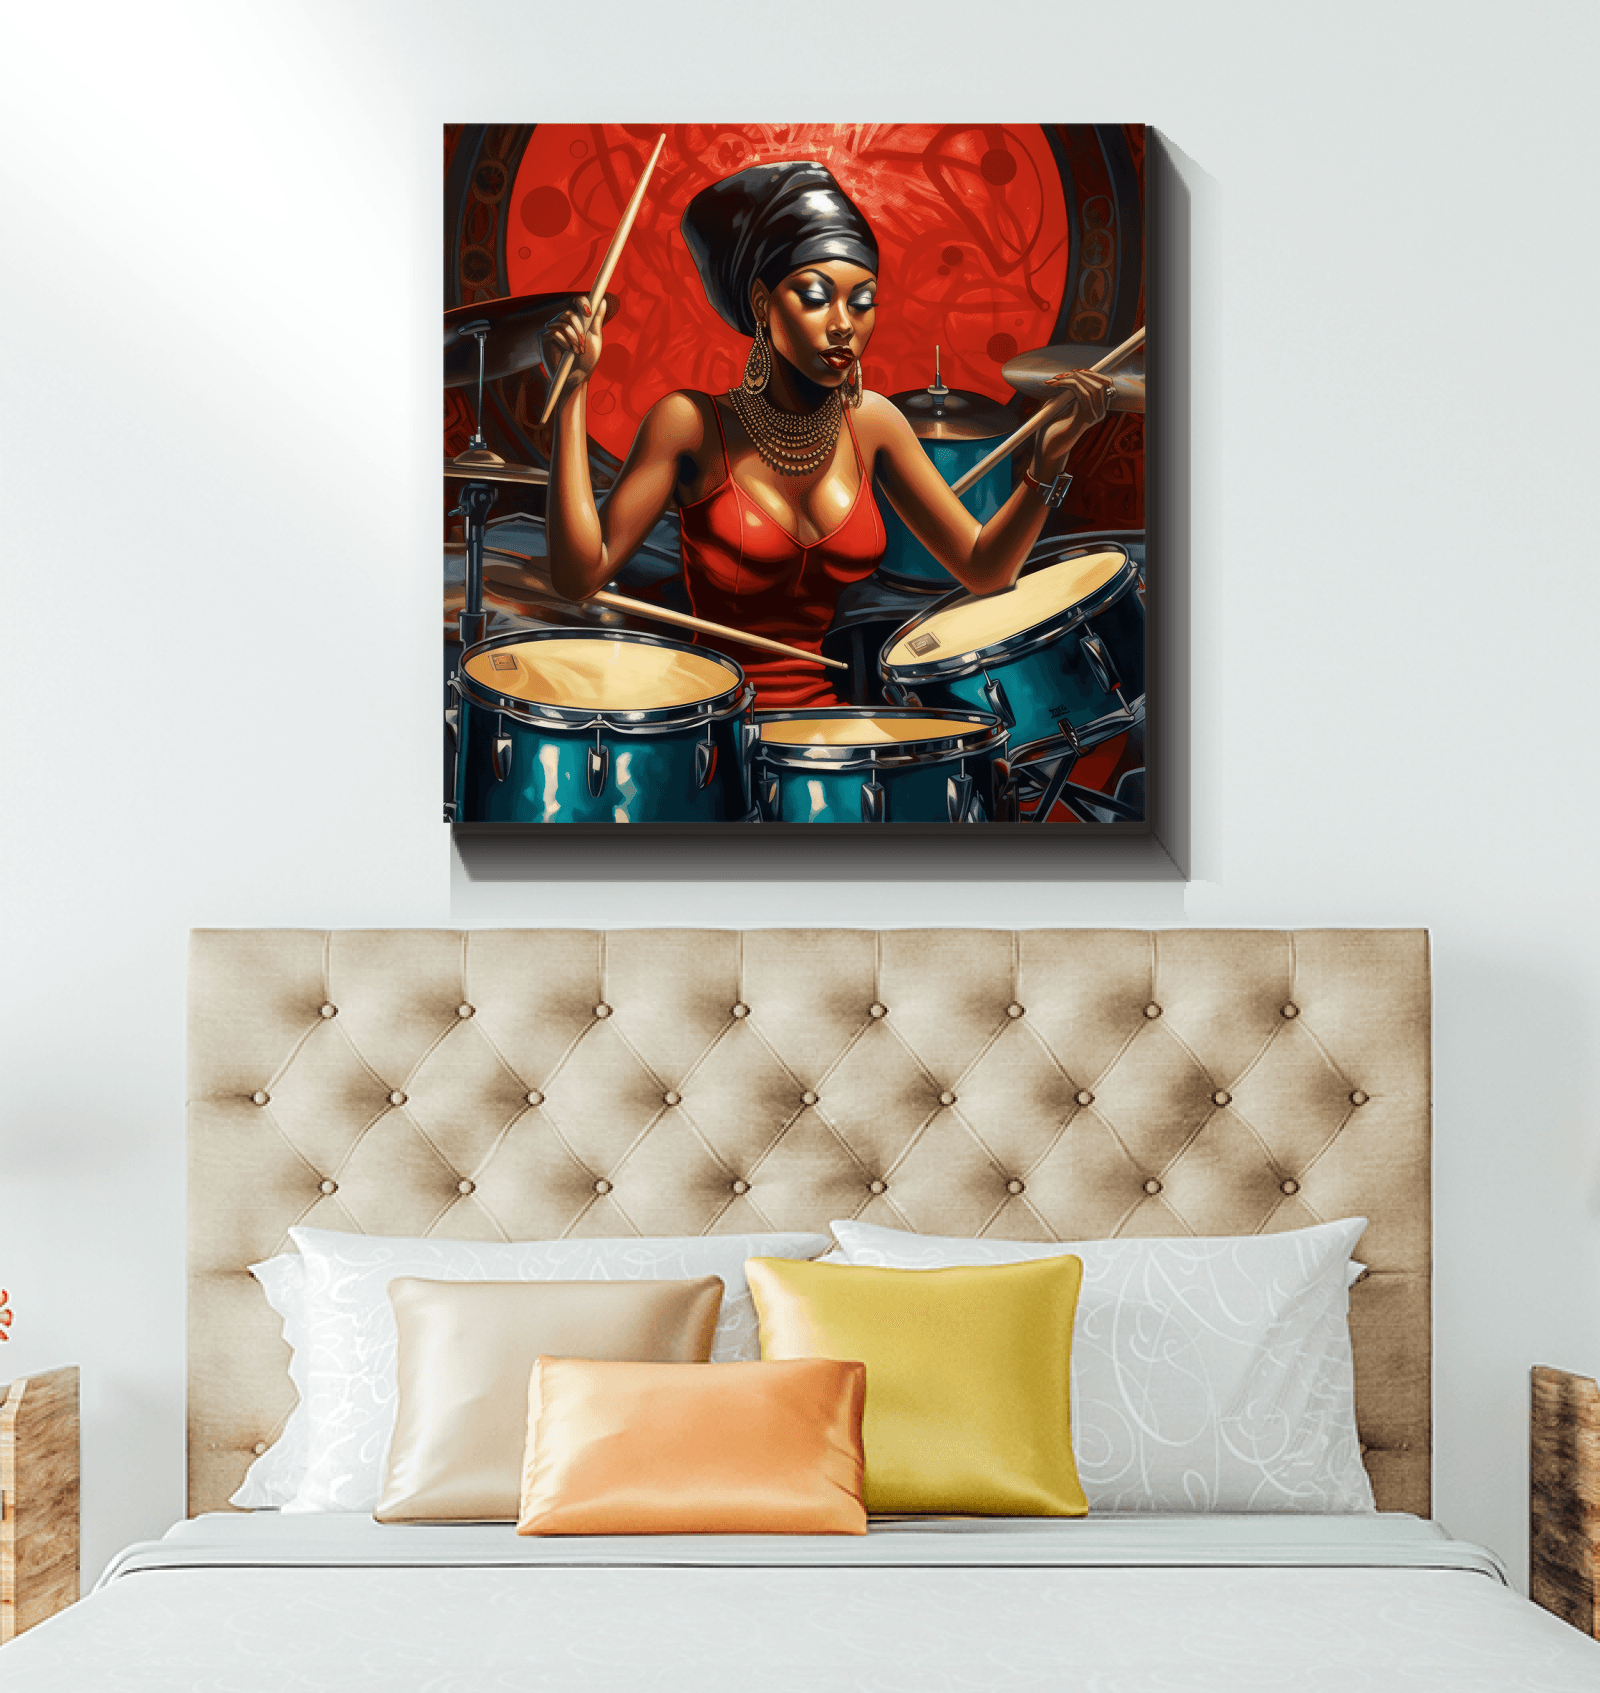 Drums Express Emotions artwork on canvas.